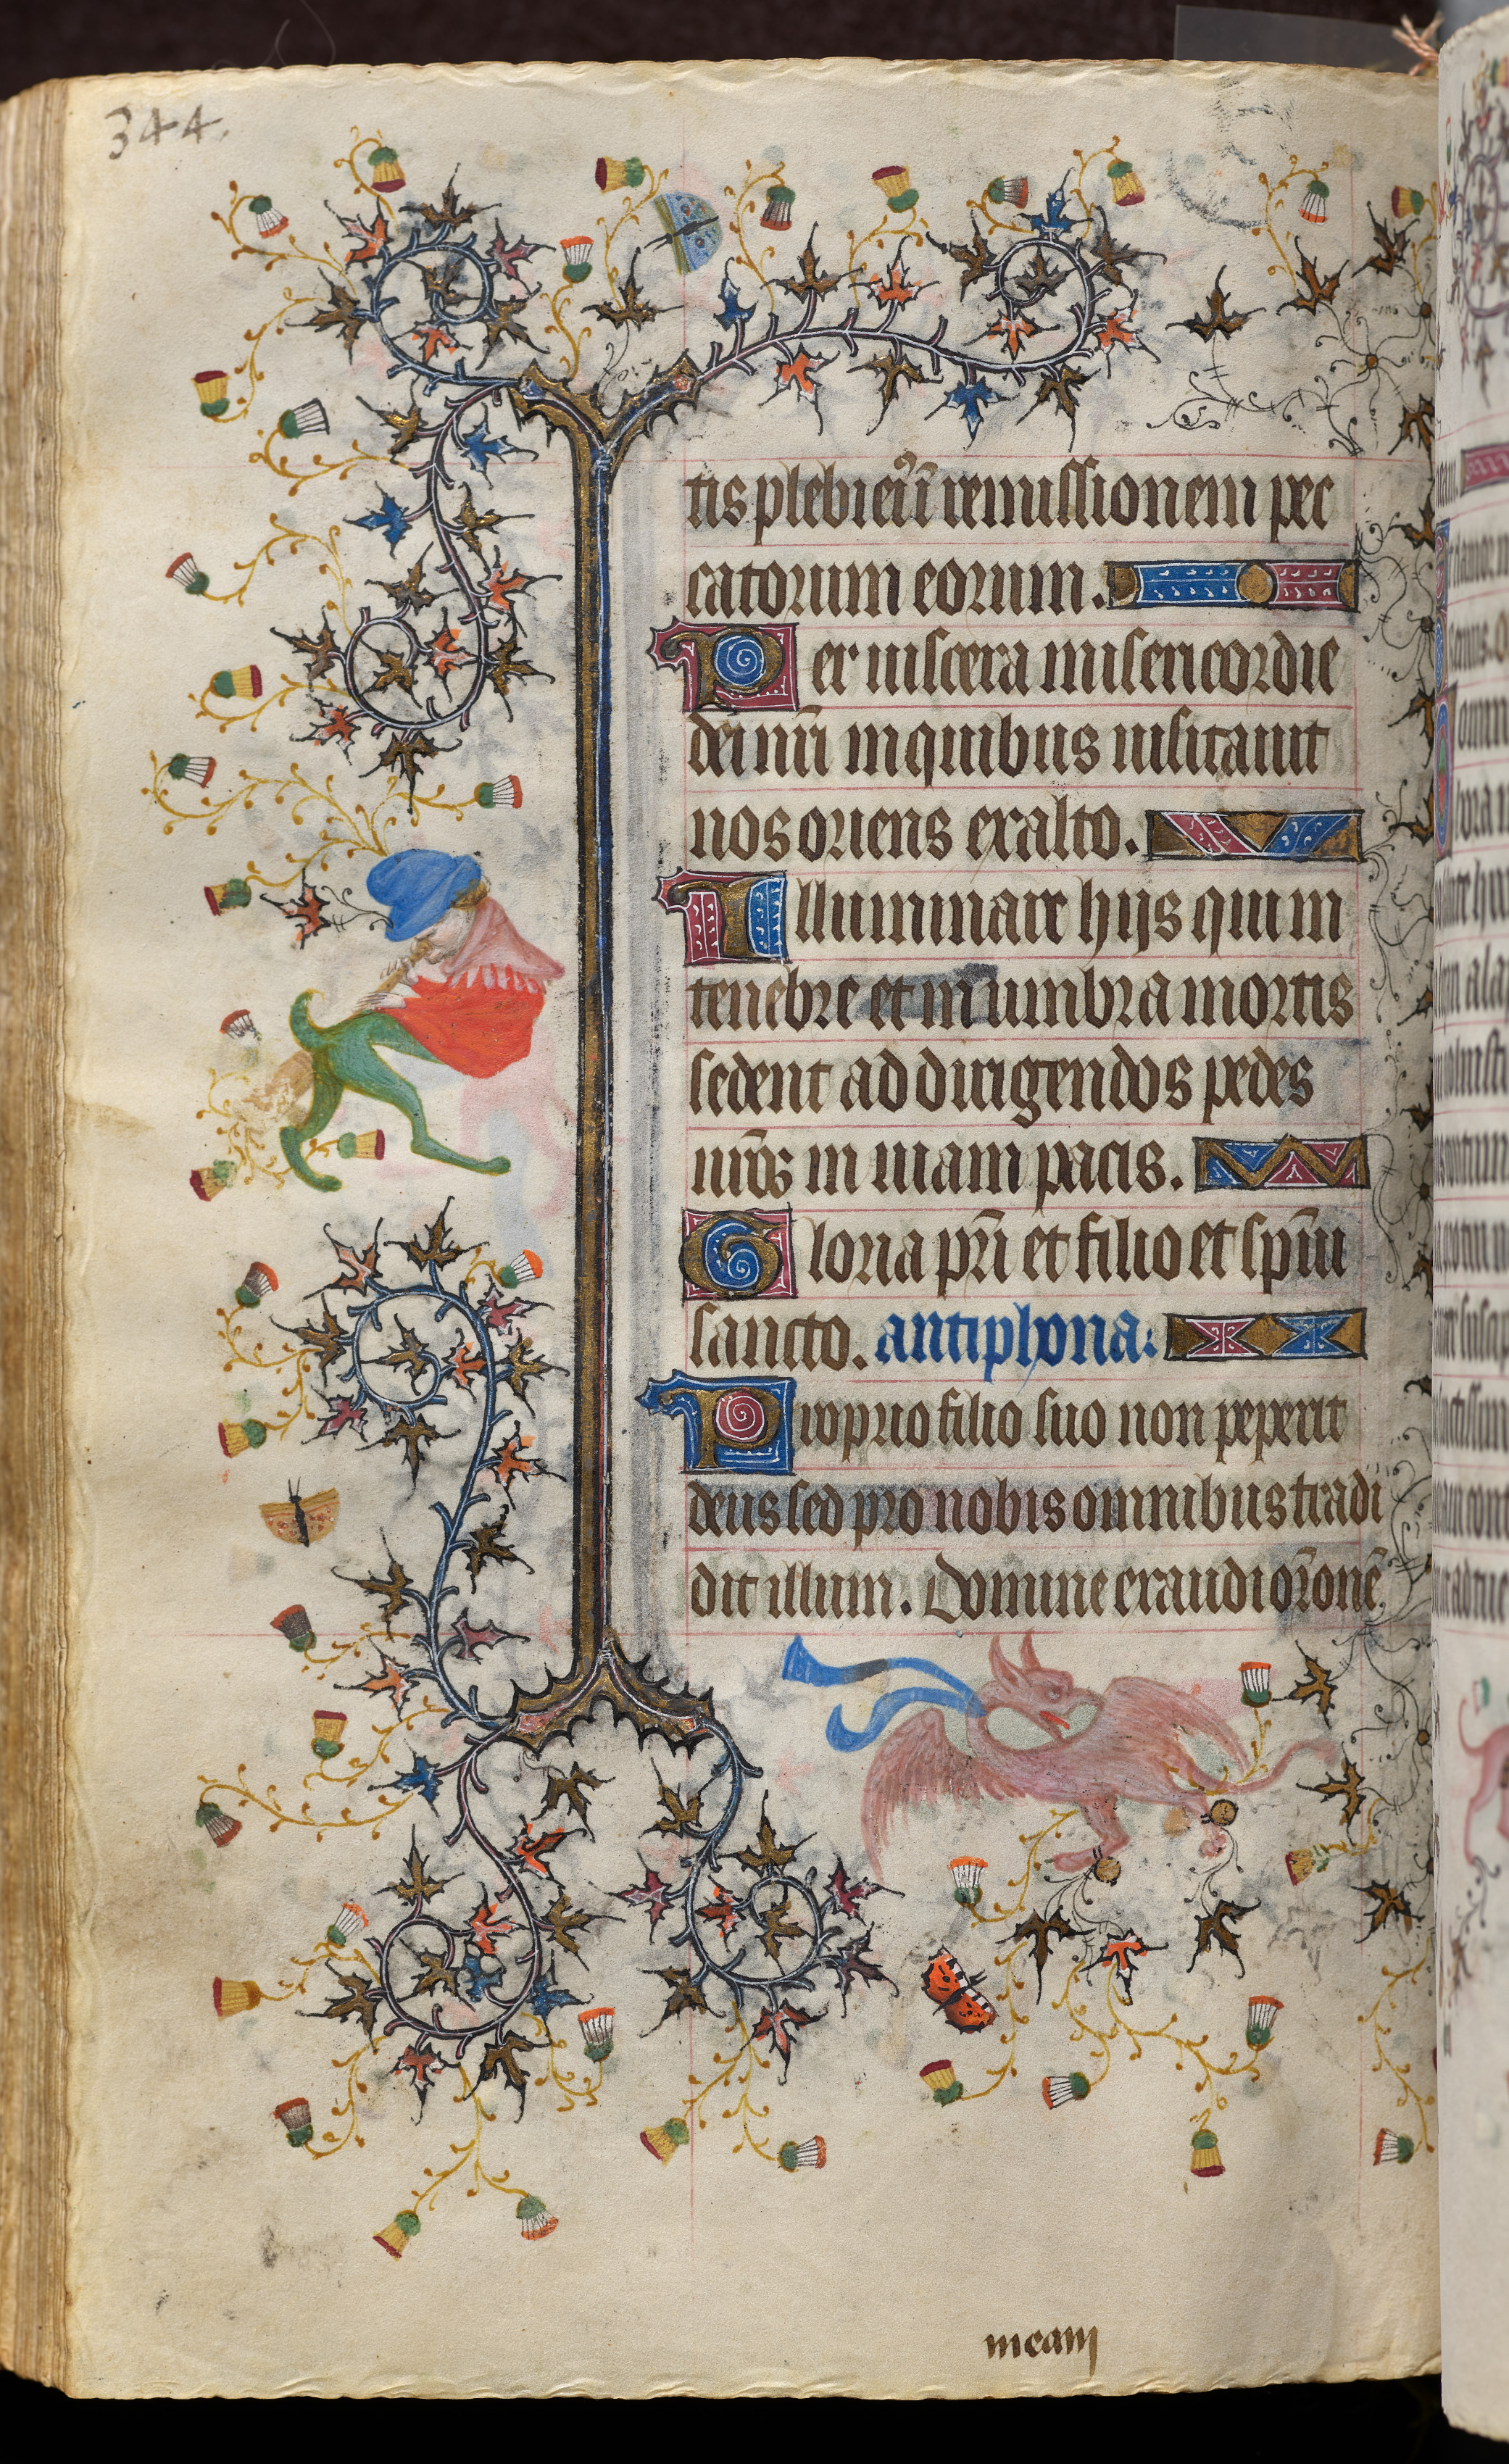 Hours of Charles the Noble, King of Navarre (1361-1425): fol. 167v, Text